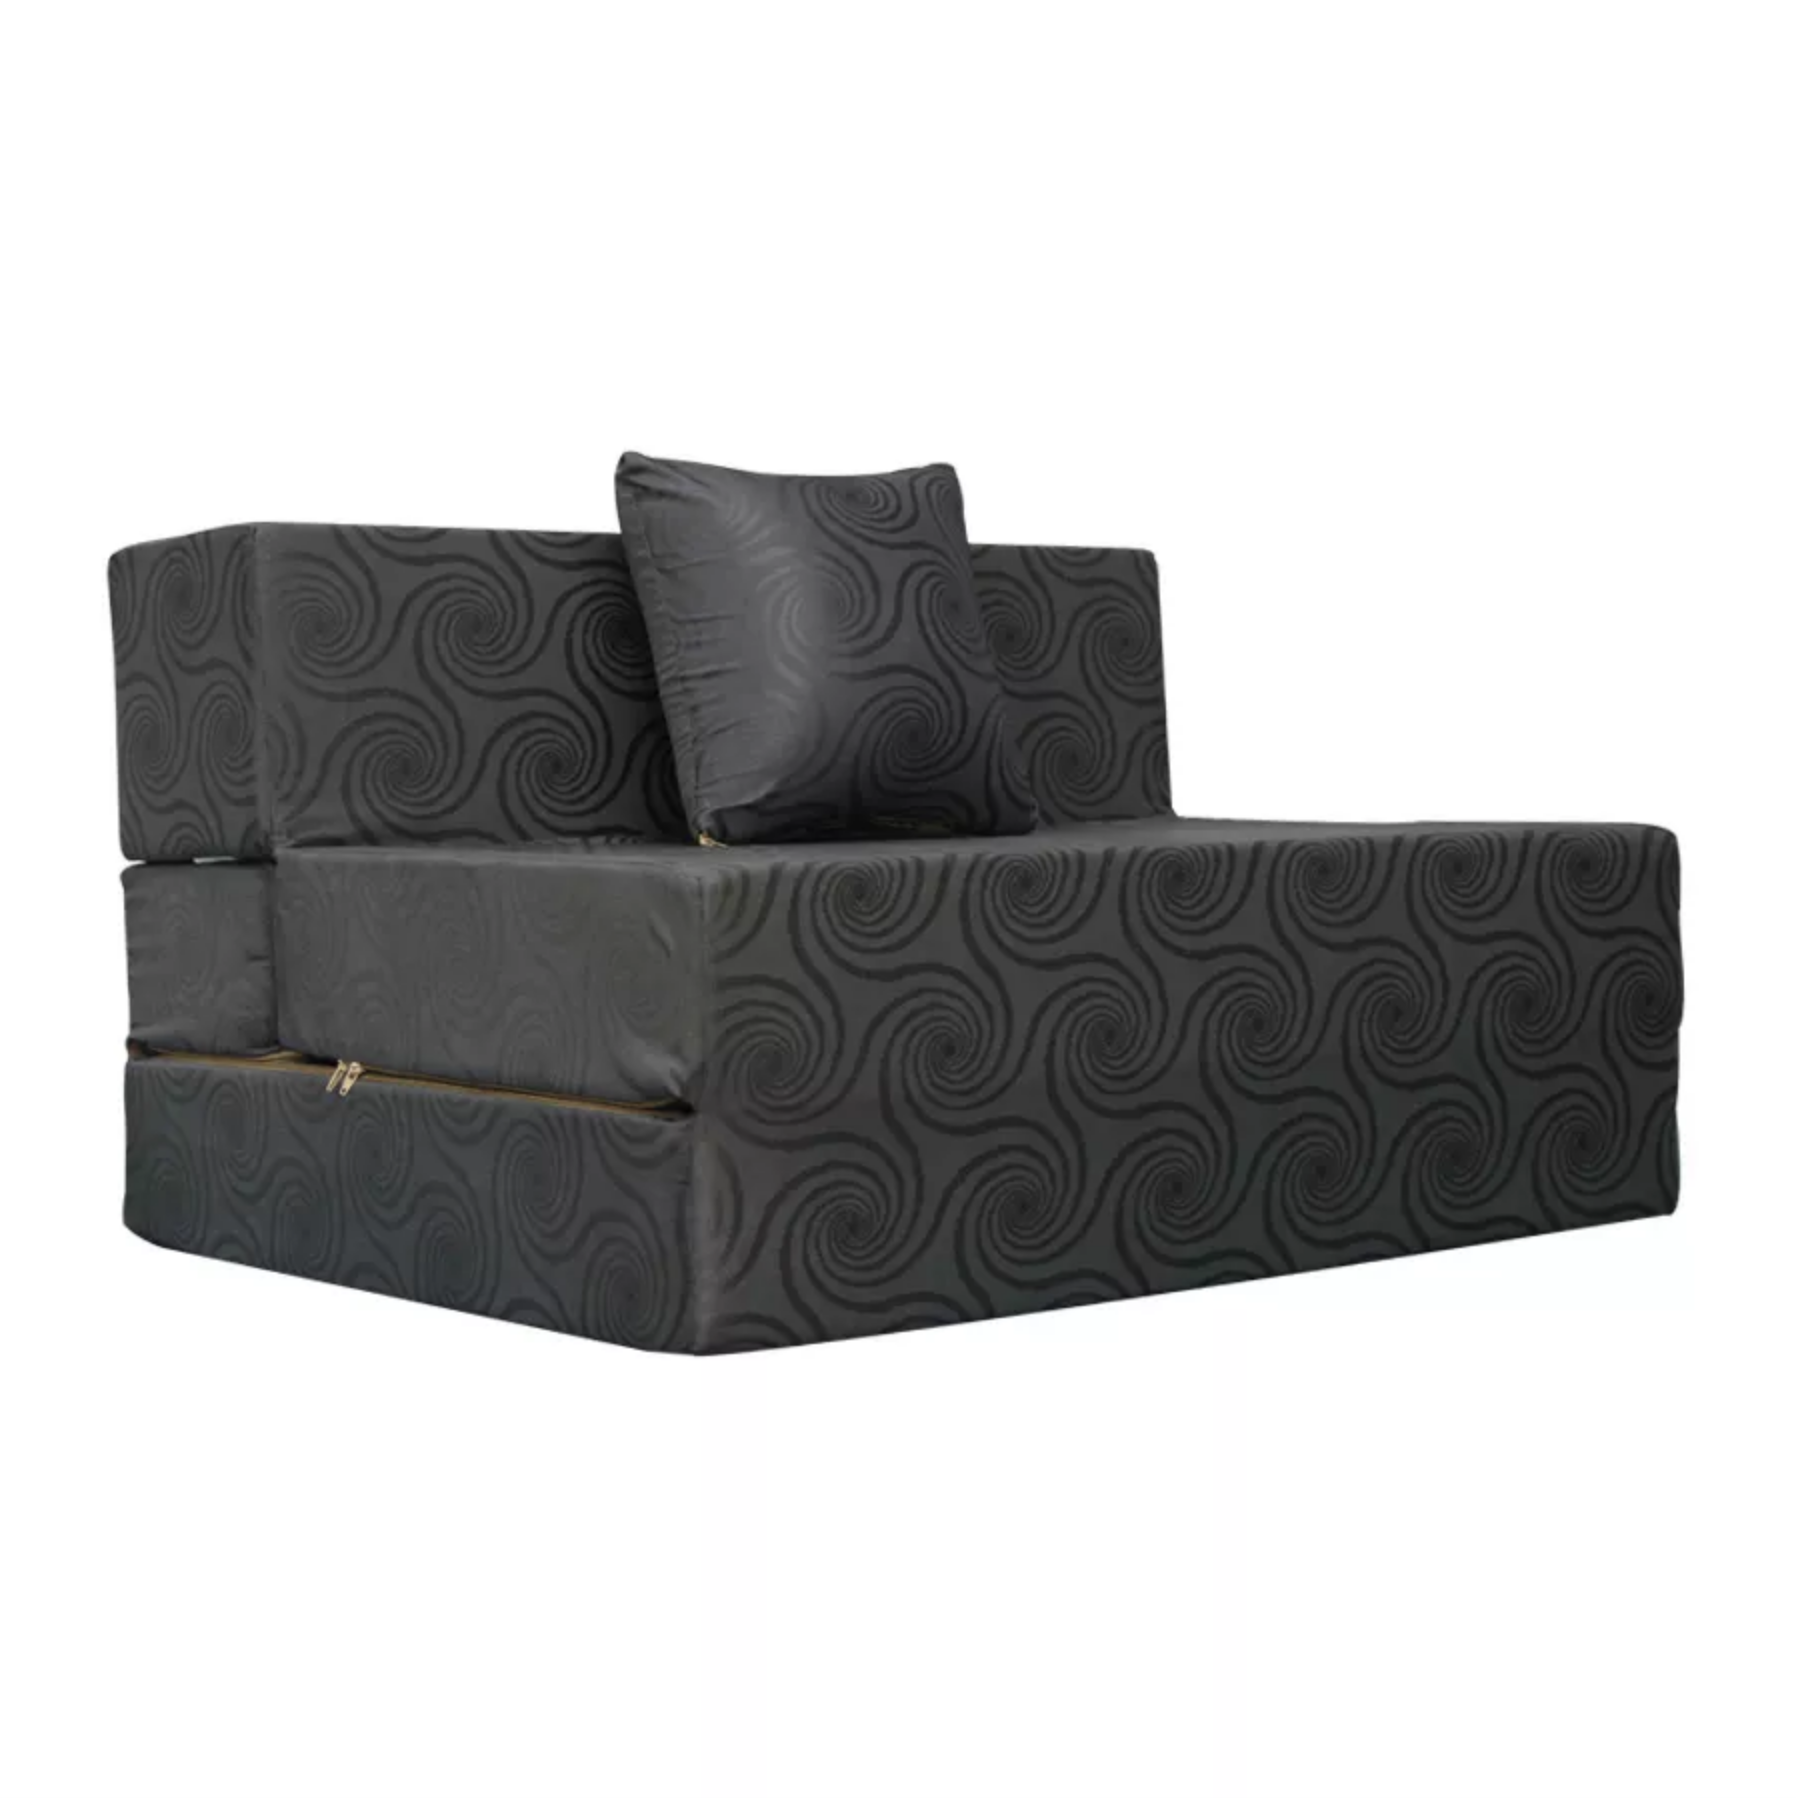 baby sofa bed price